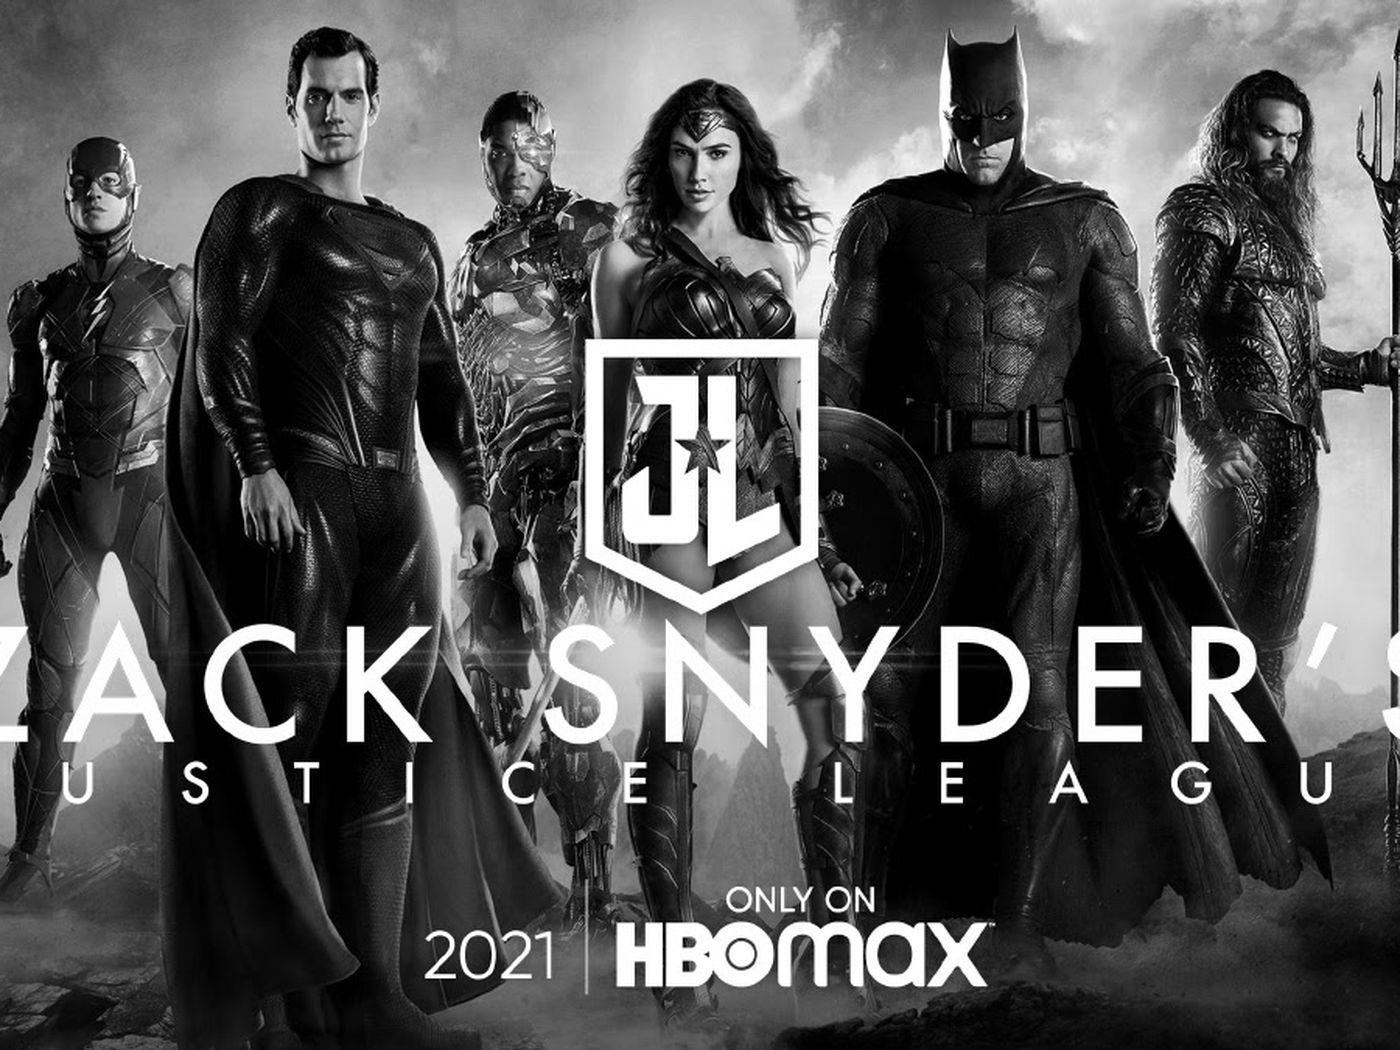 The 'Snyder Cut' of Justice League is coming to HBO Max in 2021